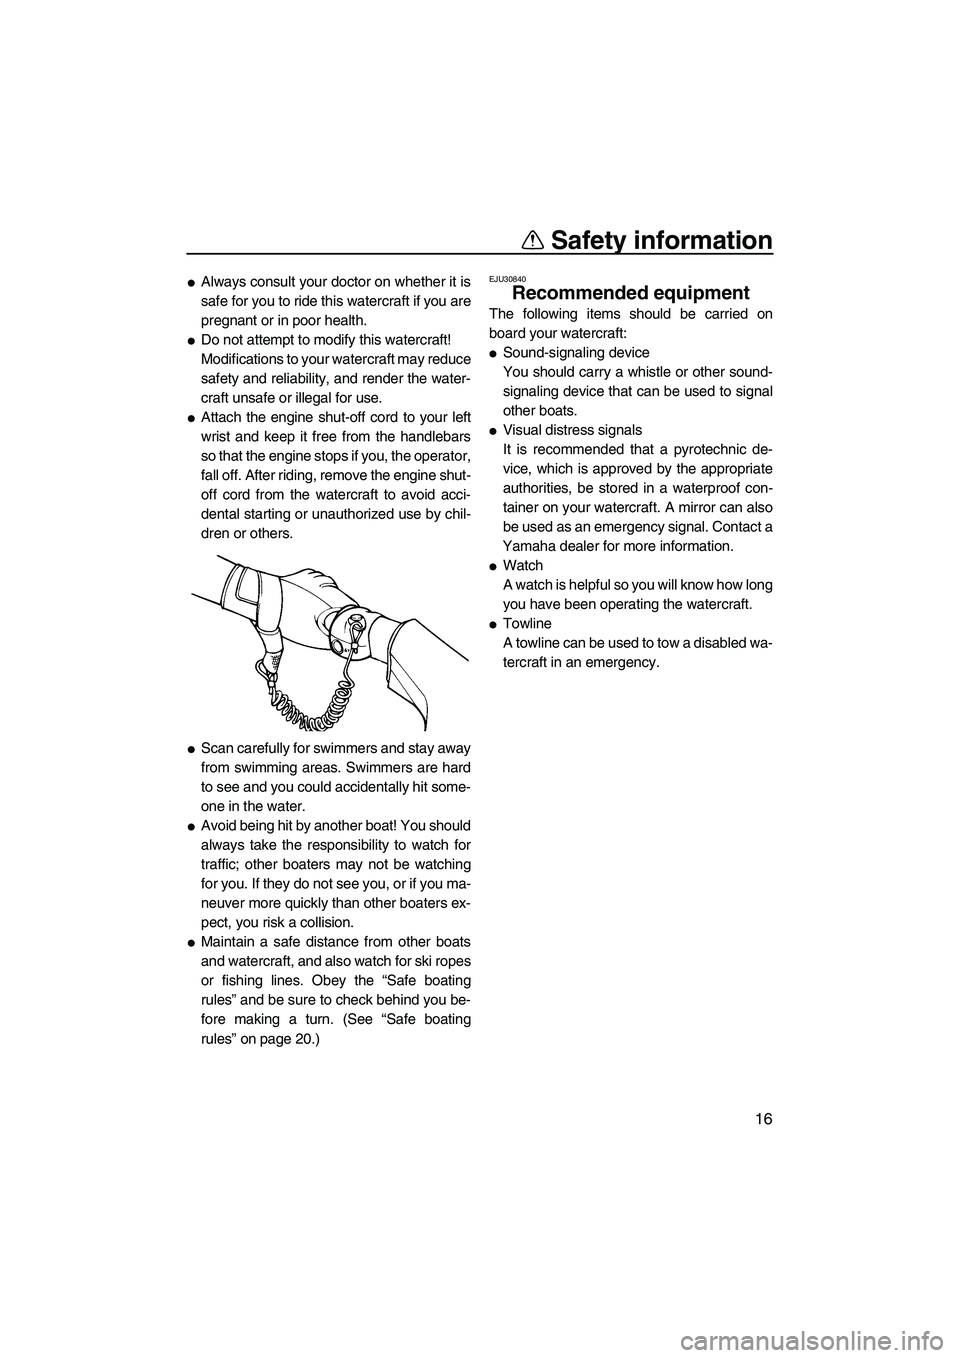 YAMAHA VX SPORT 2007  Owners Manual Safety information
16
Always consult your doctor on whether it is
safe for you to ride this watercraft if you are
pregnant or in poor health.
Do not attempt to modify this watercraft!
Modifications 